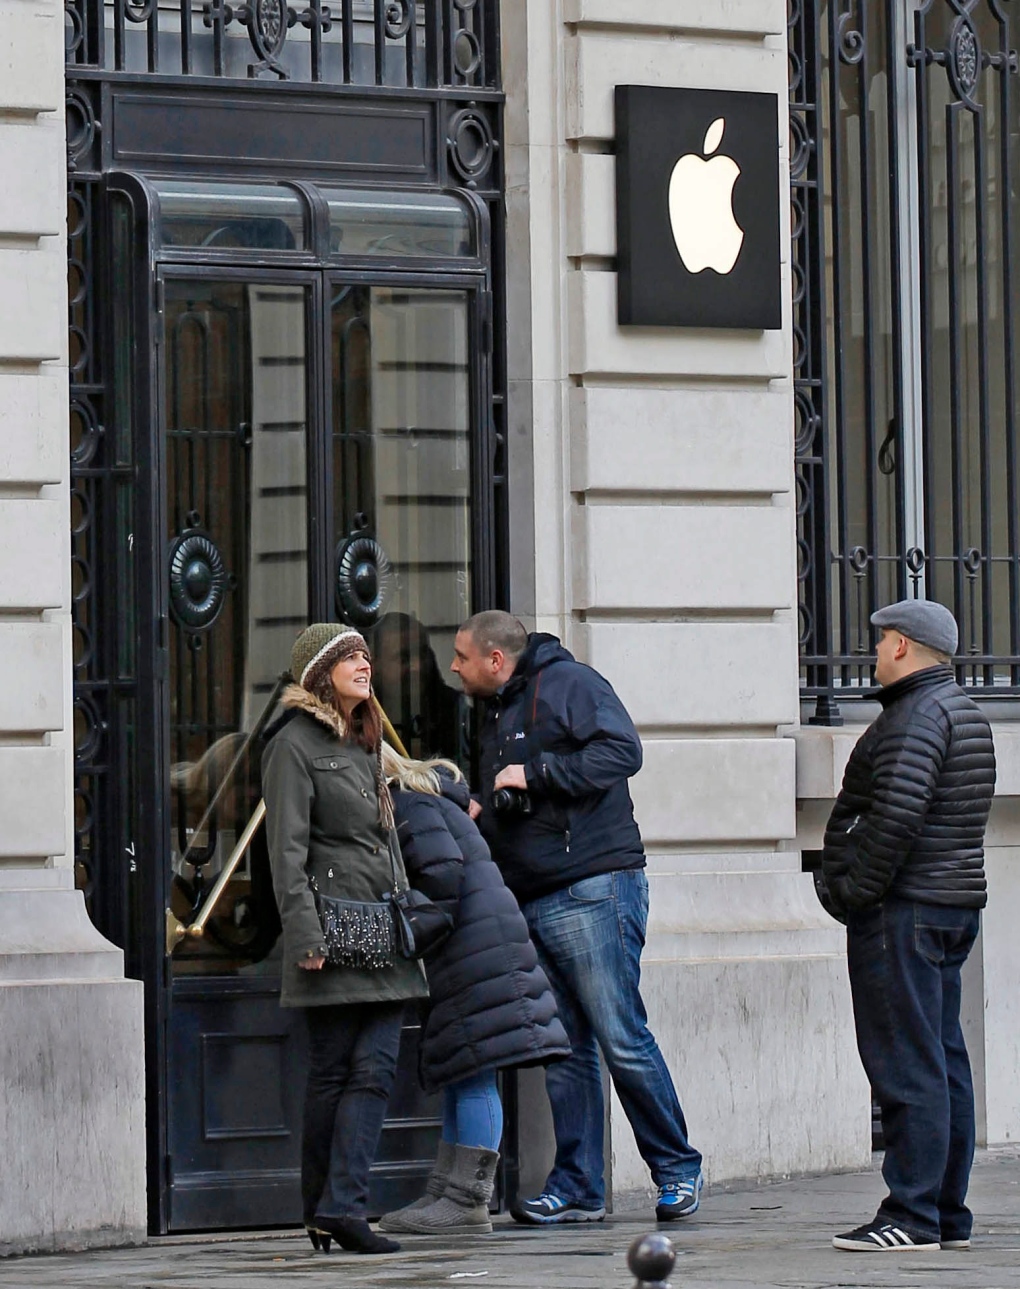 Paris Apple Store after robbery